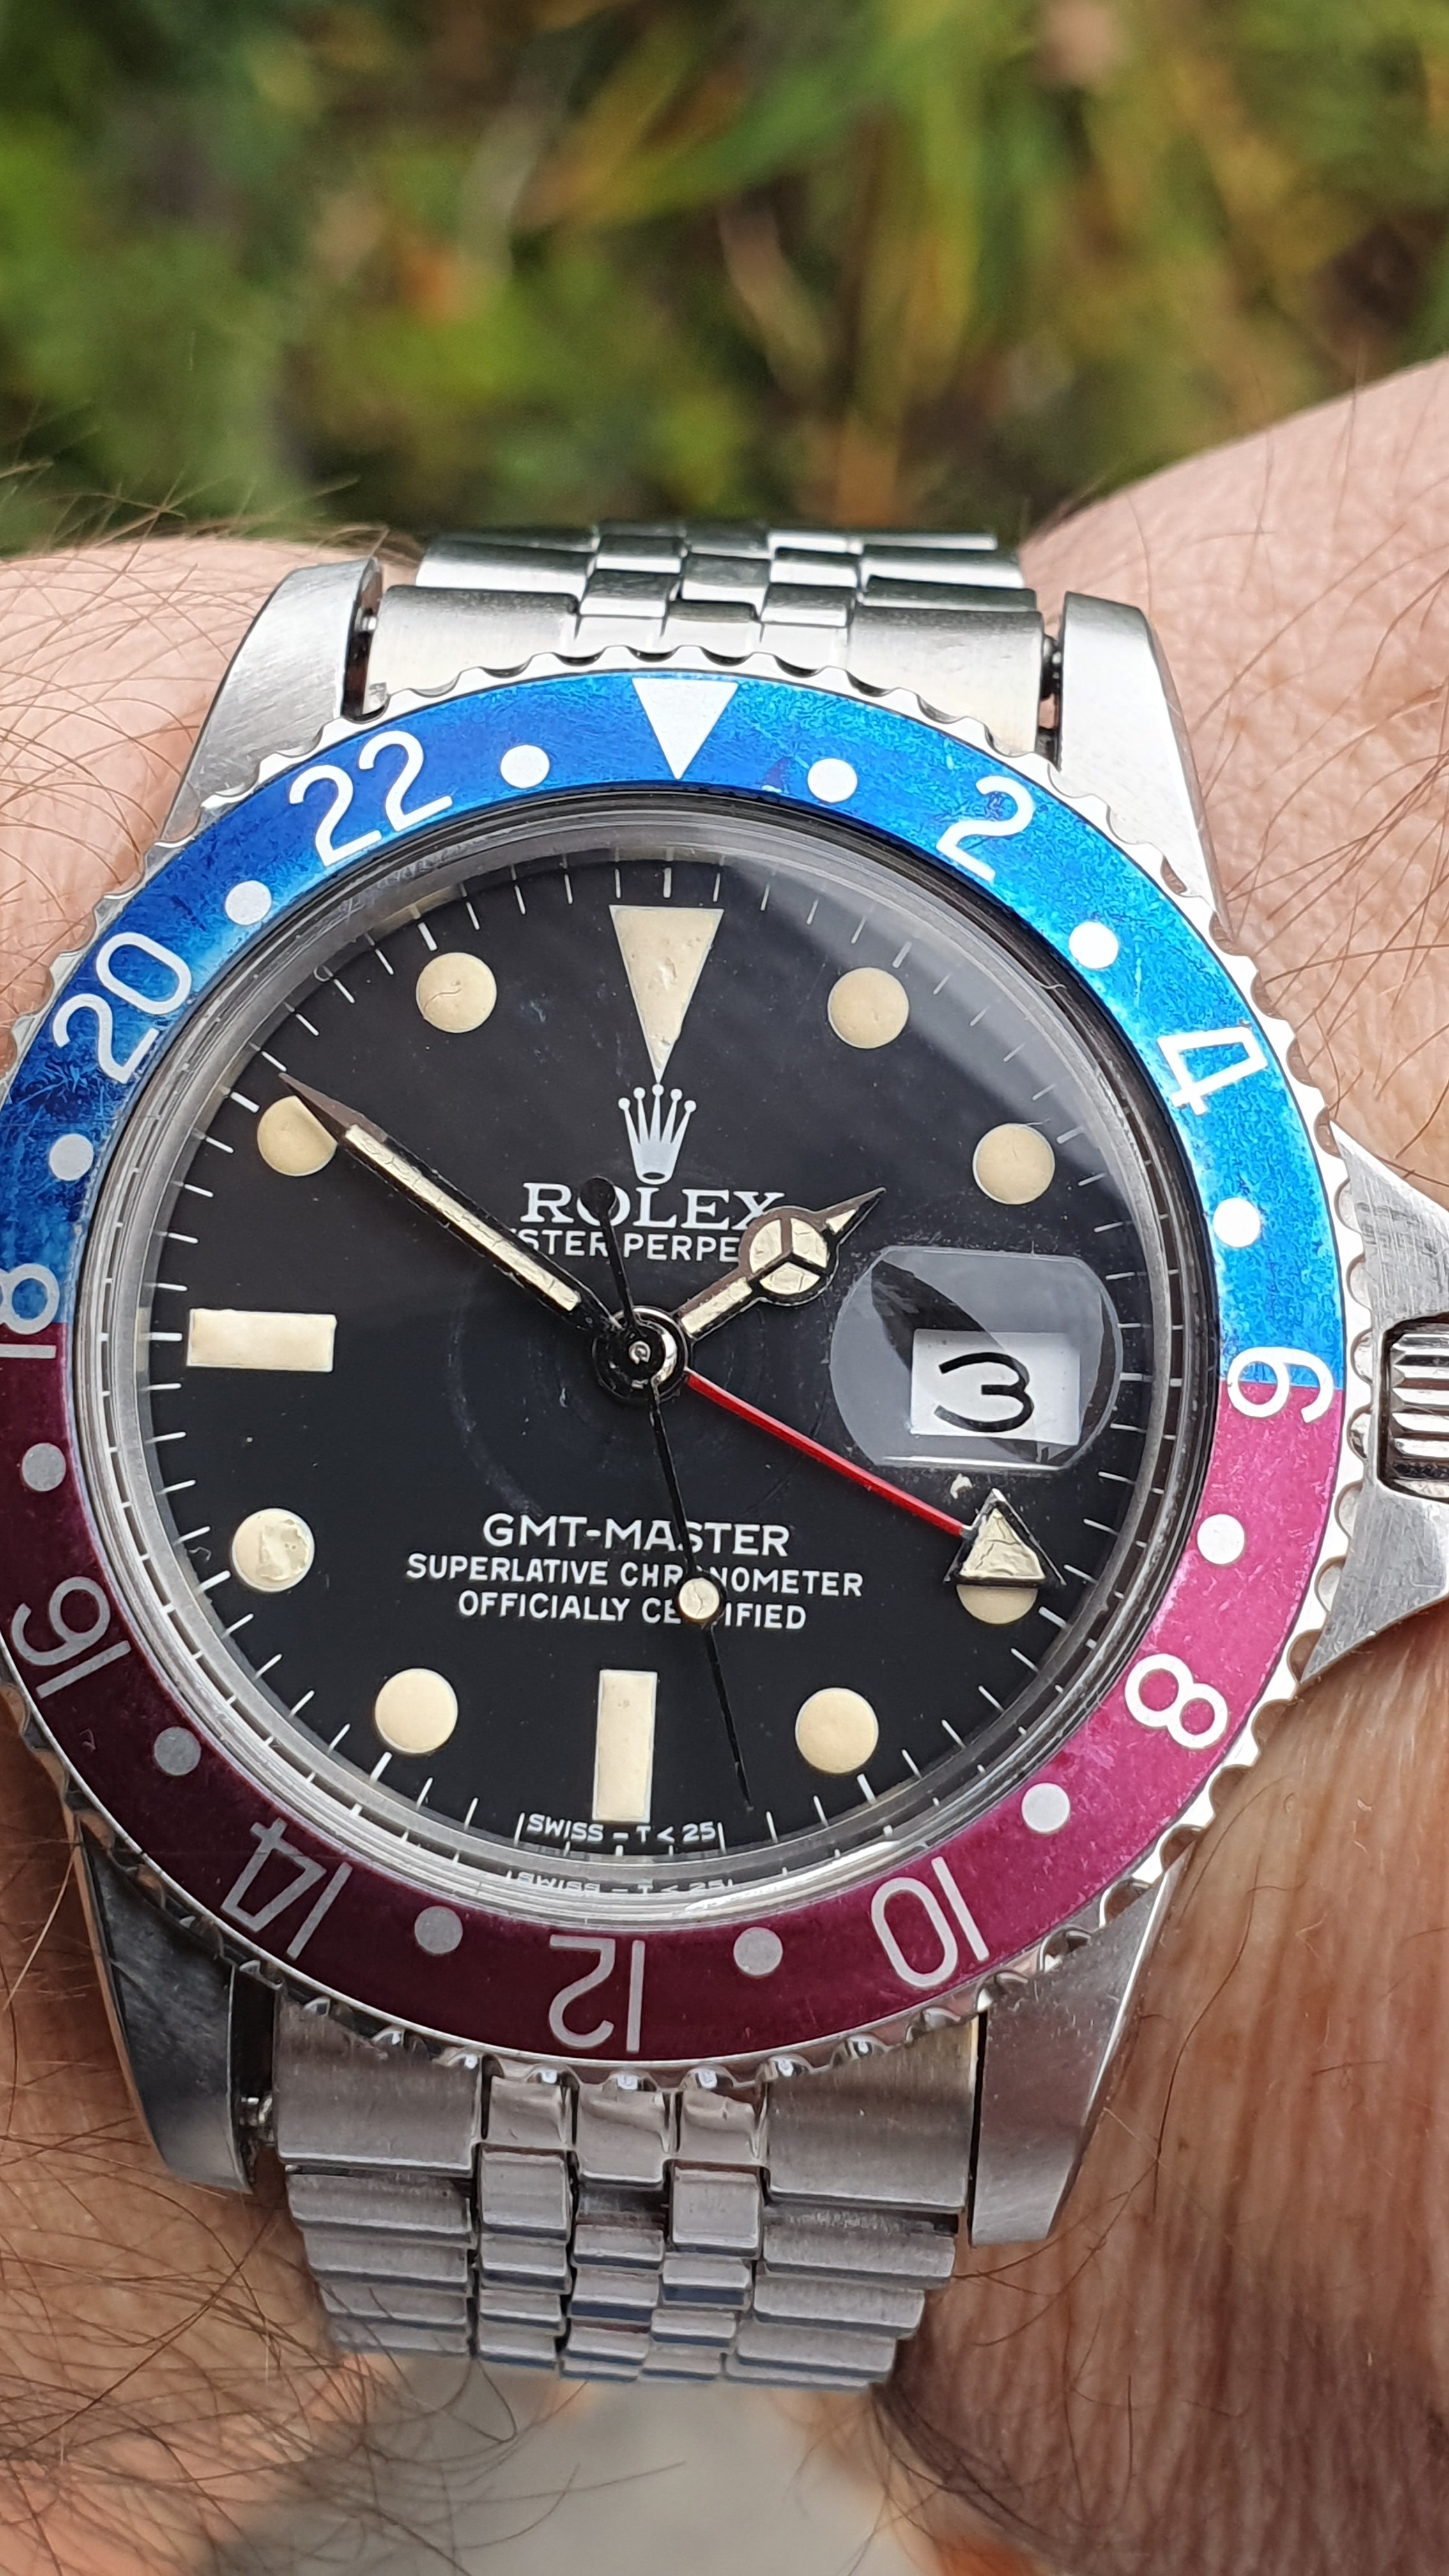 How Can You Remove Scratches From Your Rolex Watch?